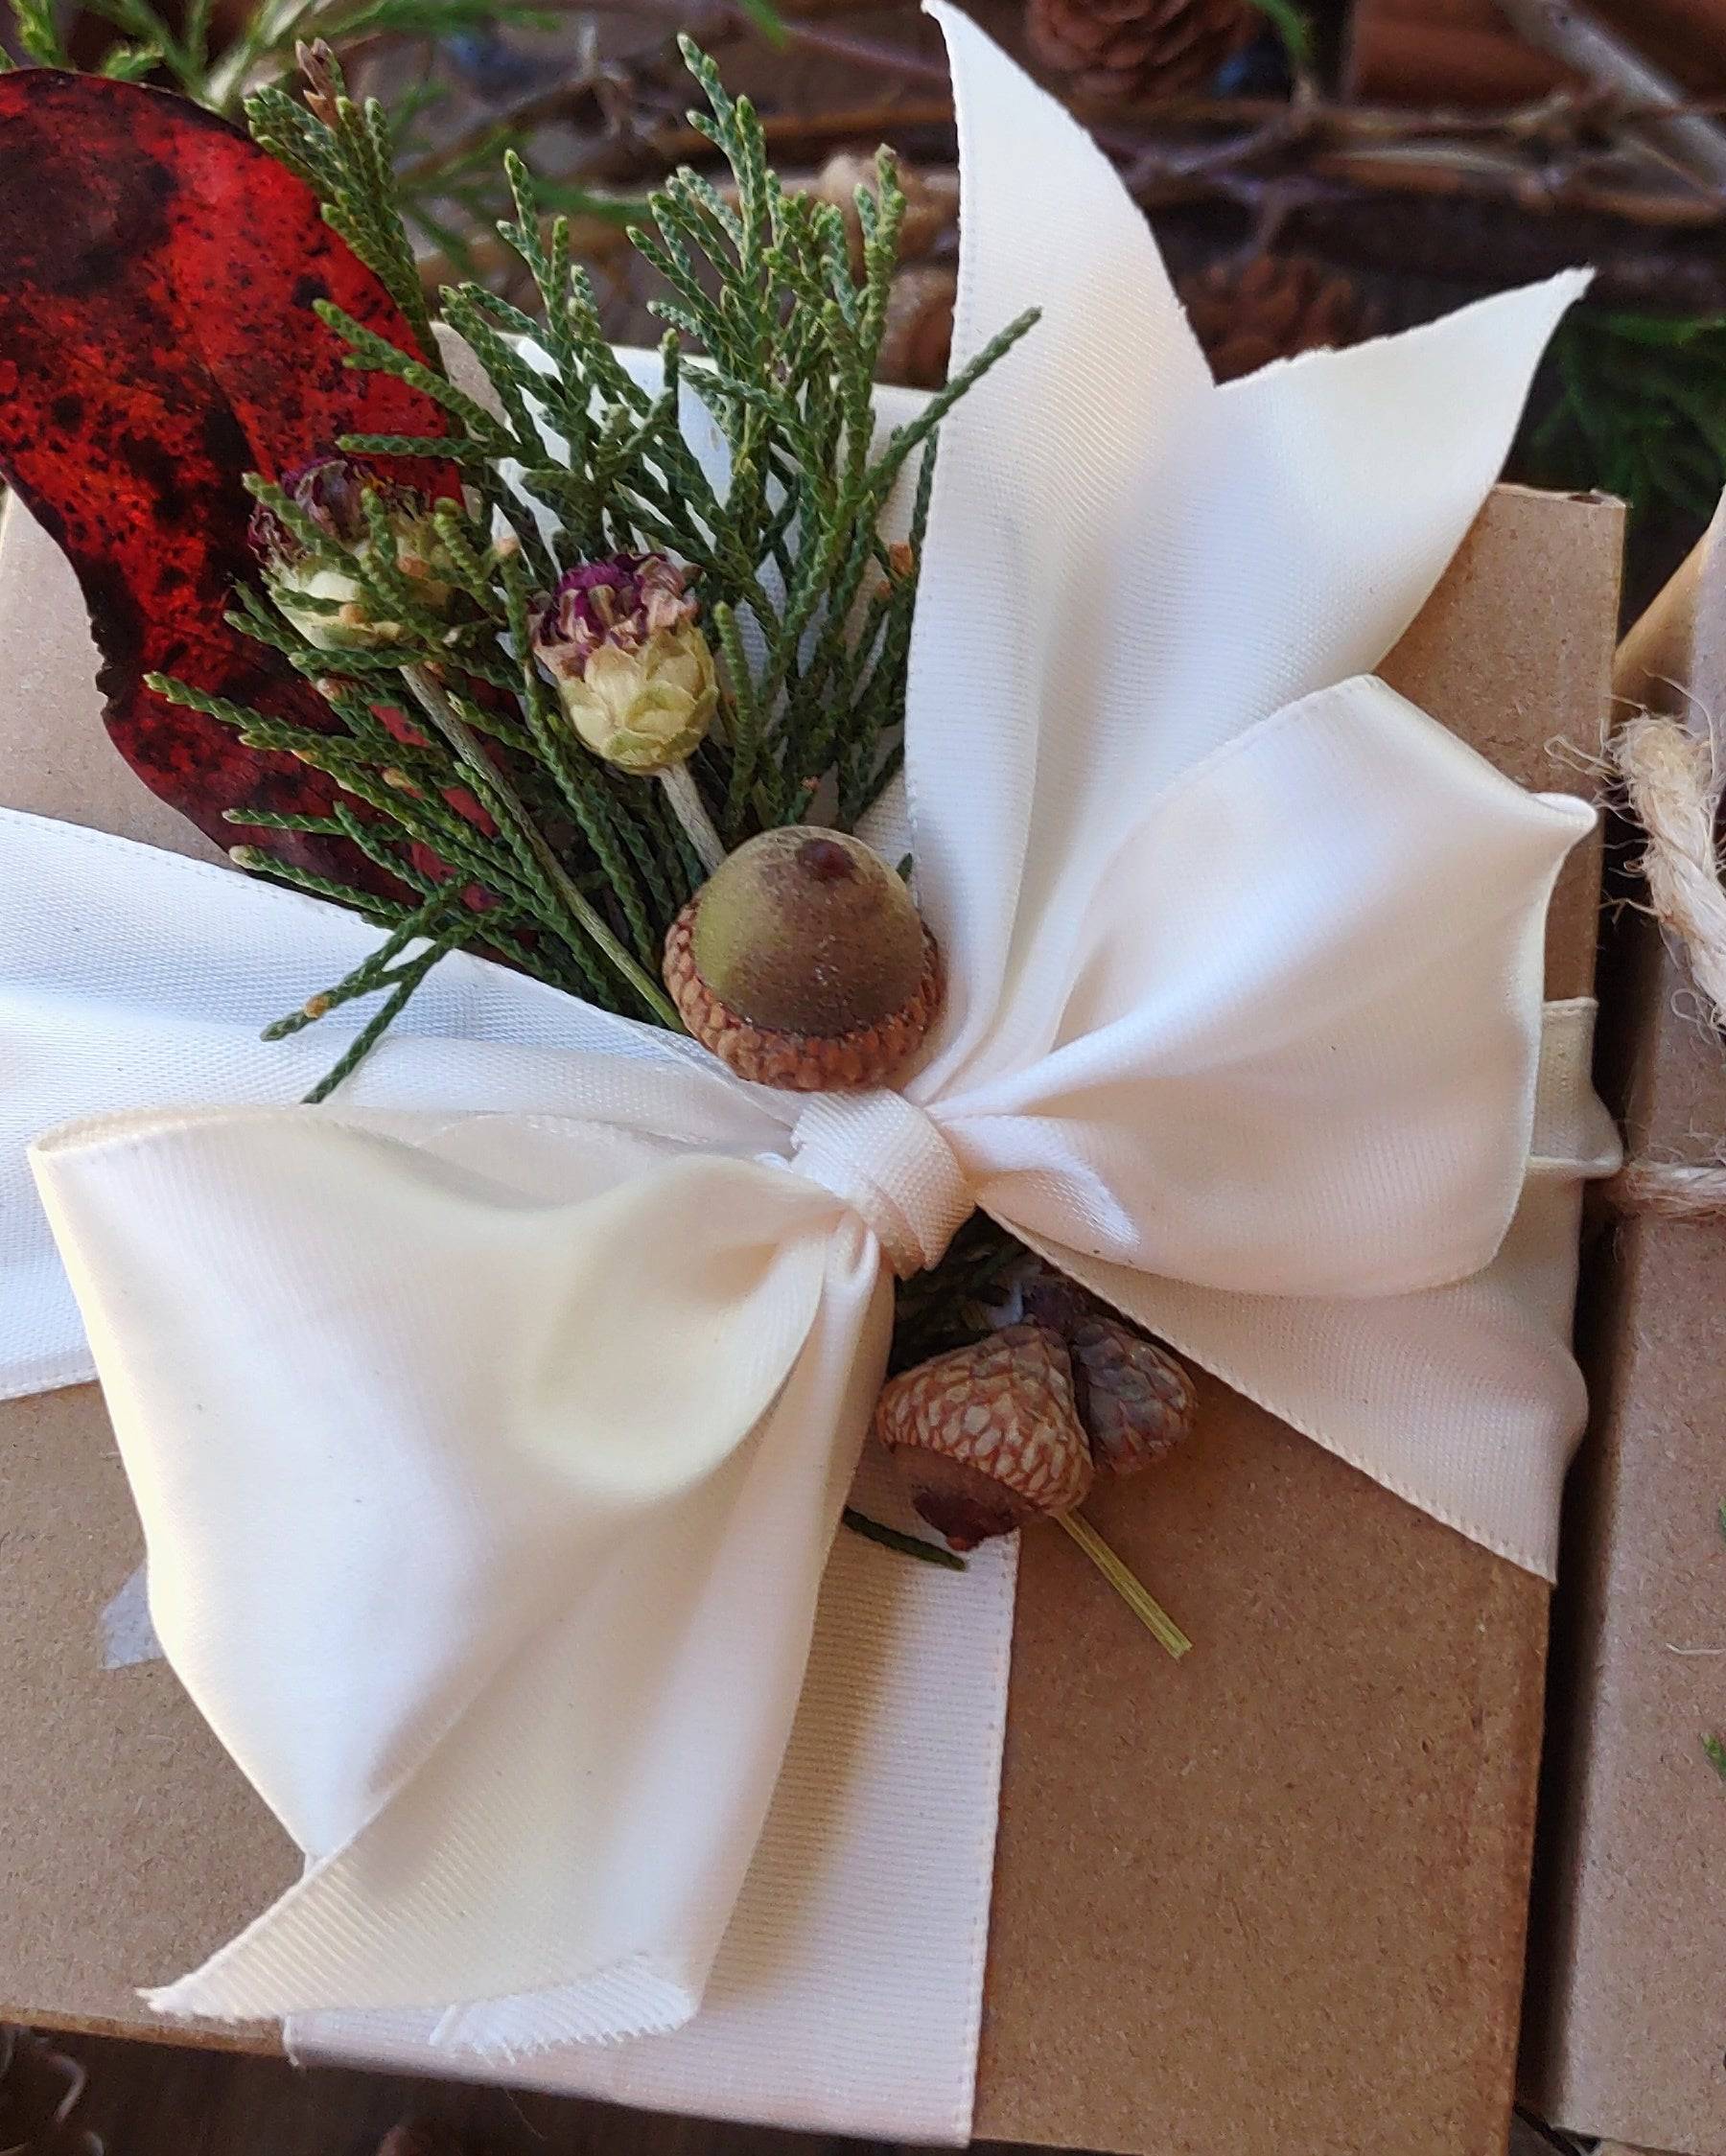 🎁 GIFT WRAPPING OPTIONS + DROP SHIPPING - Cold Creek Natural Farm